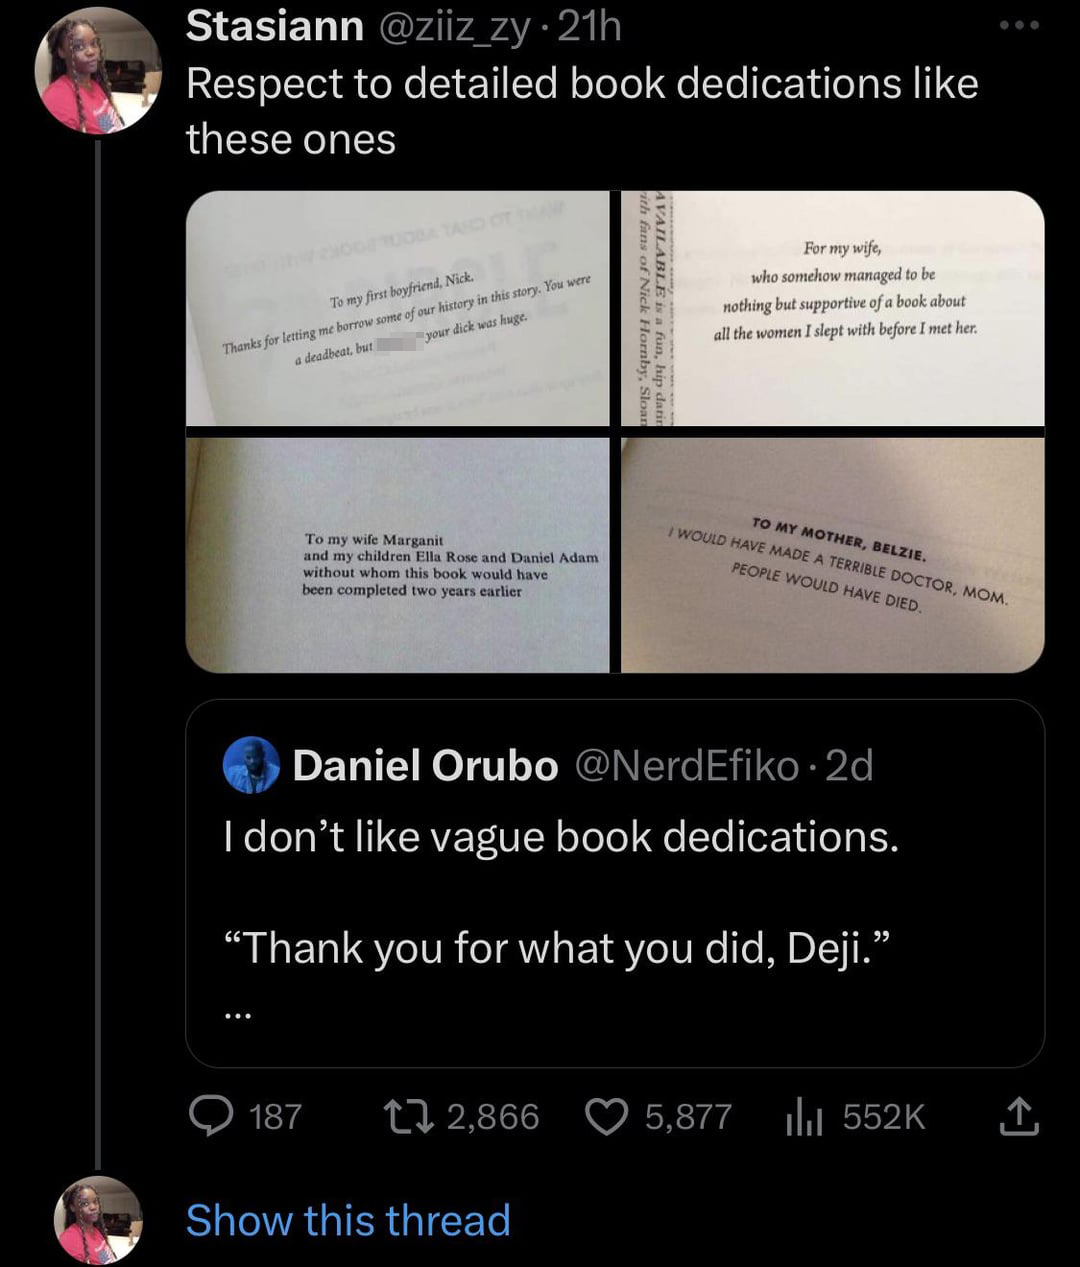 funny tweets and memes - screenshot - Stasiann .21h Respect to detailed book dedications these ones To my first boyfriend, Nick. Thanks for letting me borrow some of our history in this story. You were a deadbeat, but your dick was huge. To my wife Margan